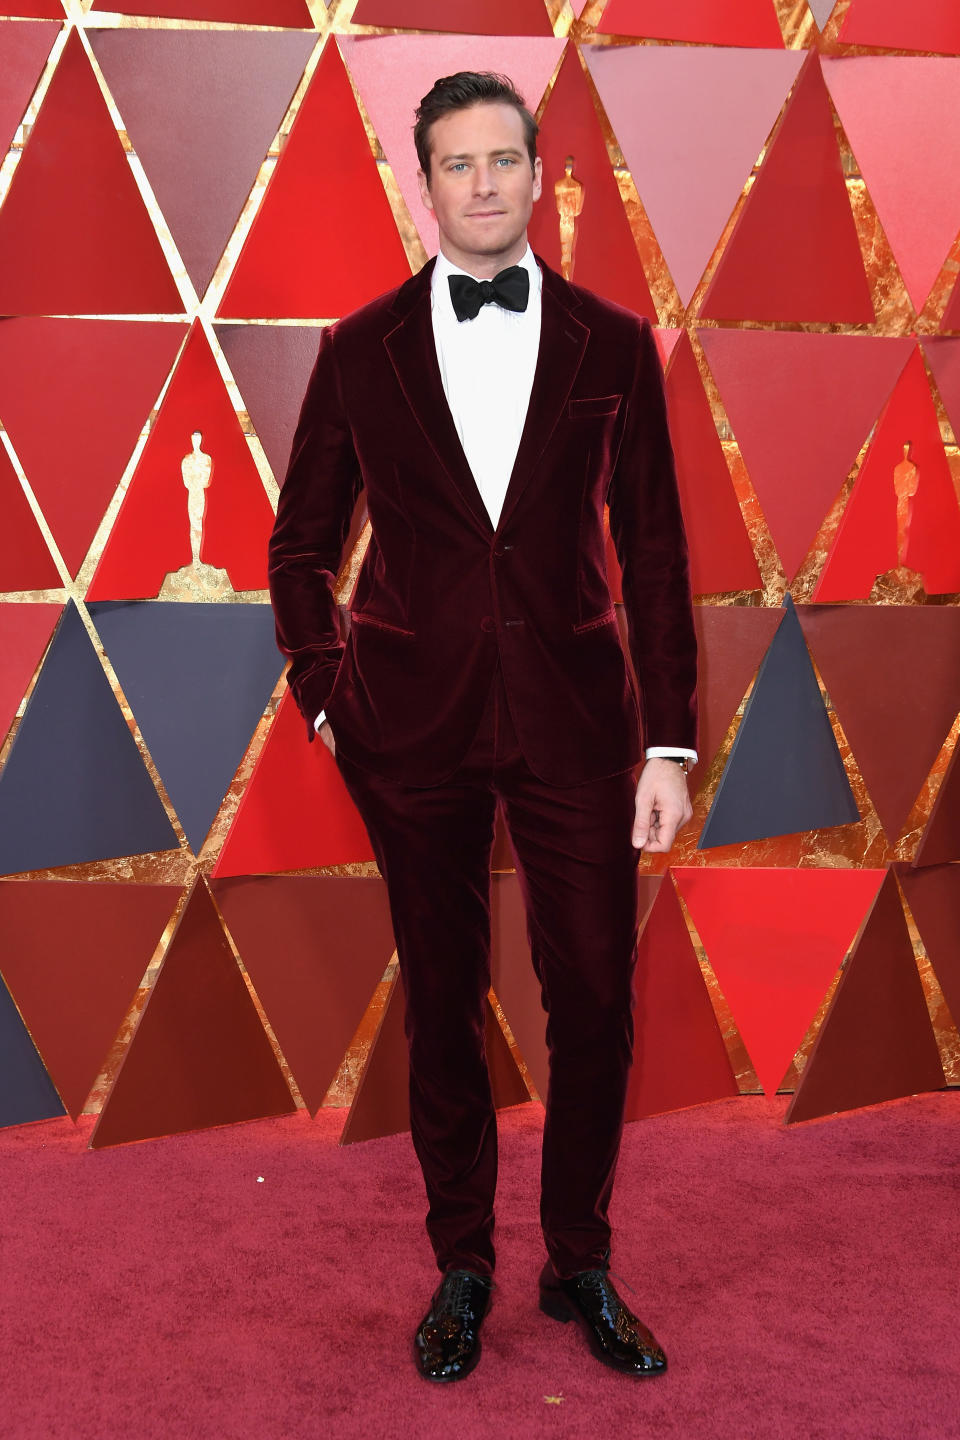 Armie Hammer at the 2018 Academy Awards on March 4, 2018